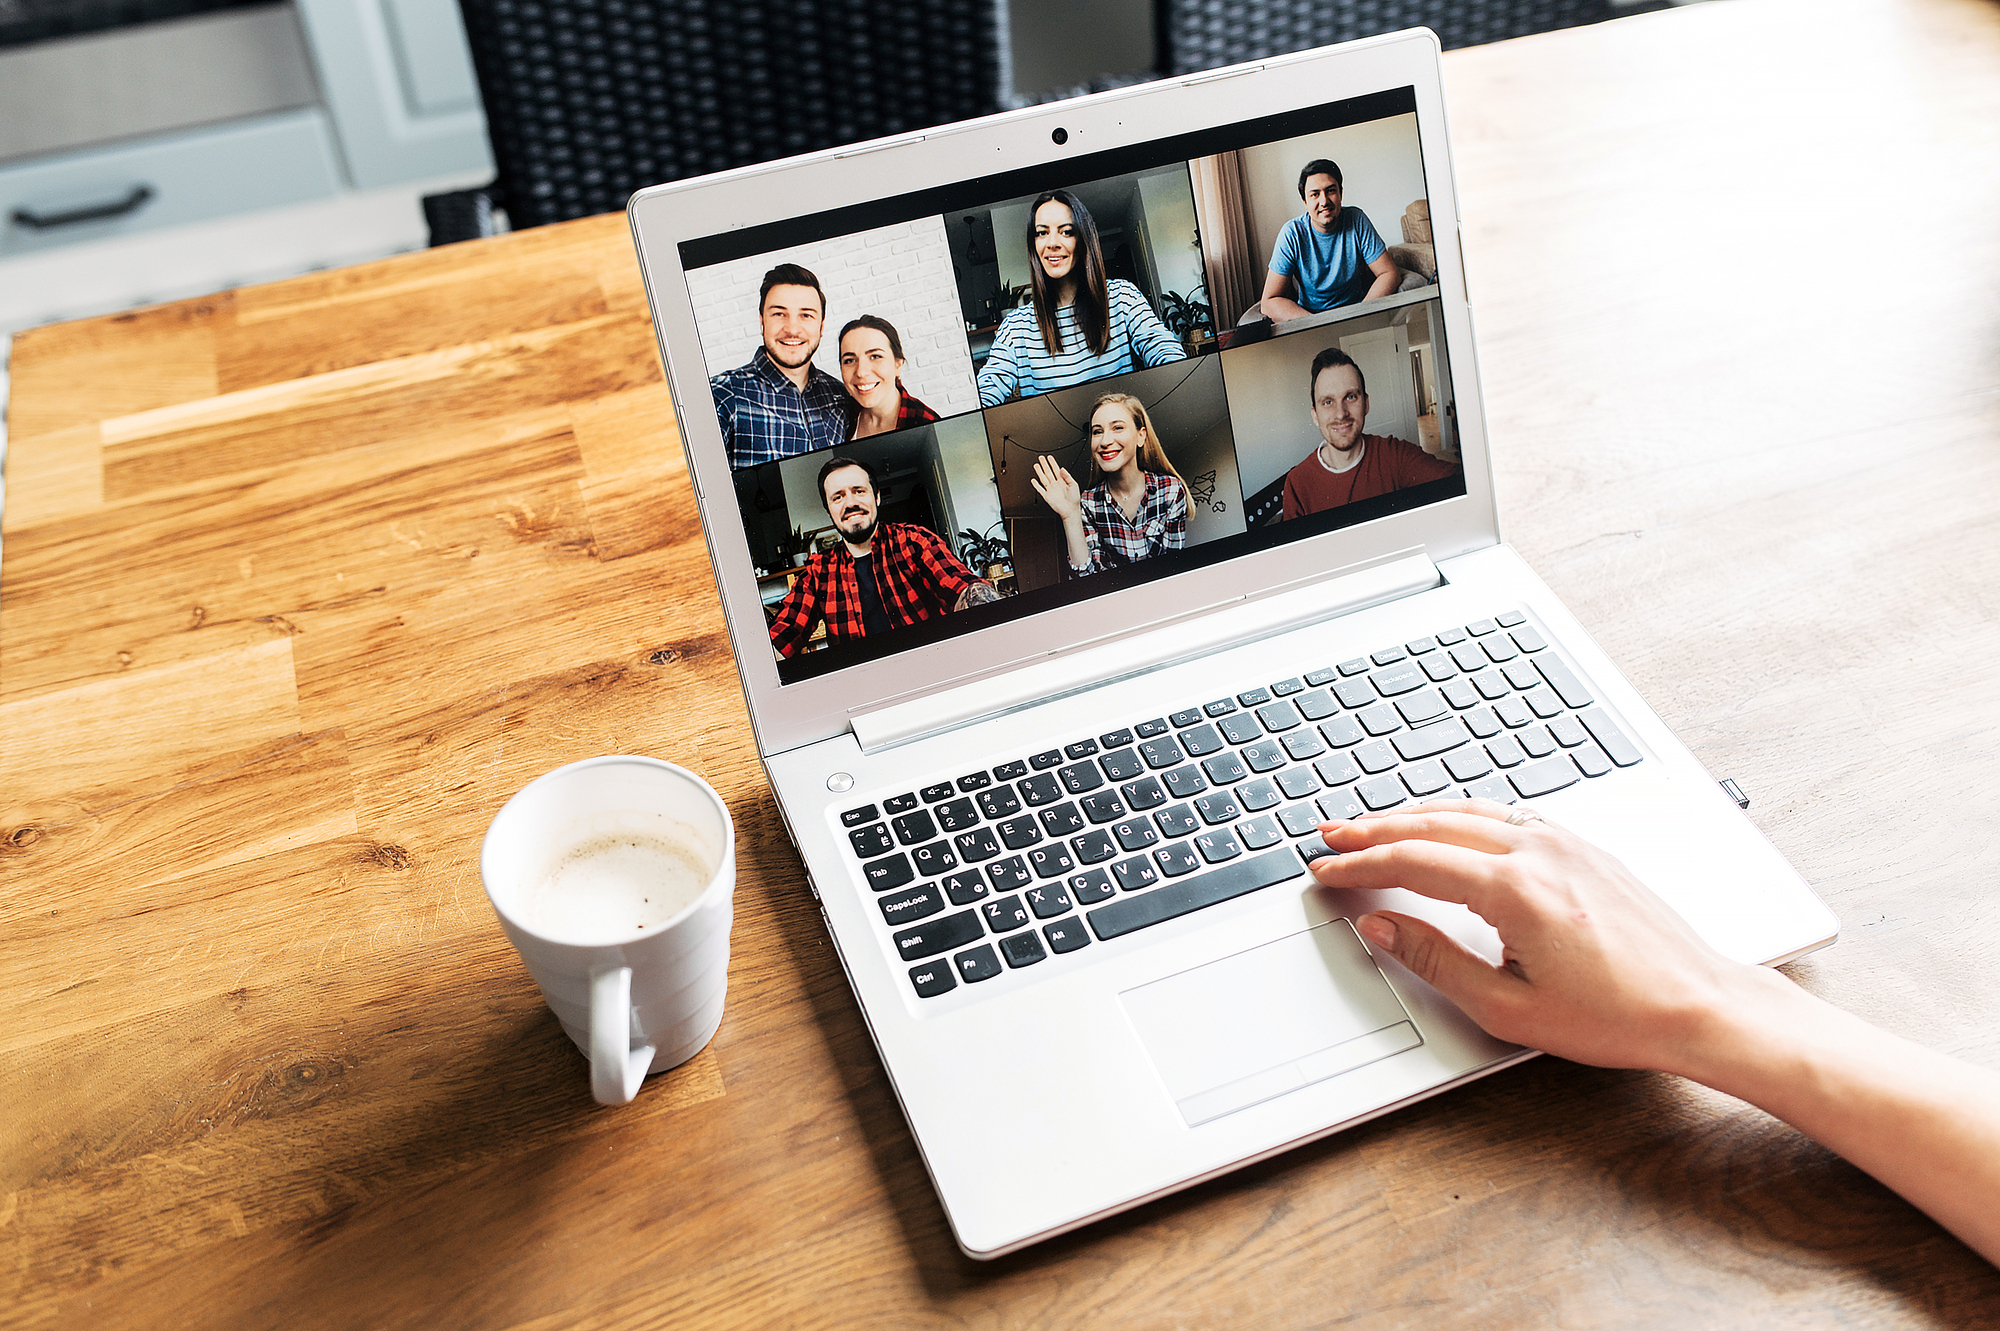 Video call, zoom. Icons of a group of people on laptop screen, app for video online communication. Female hands on the keyboard, cup of coffee near